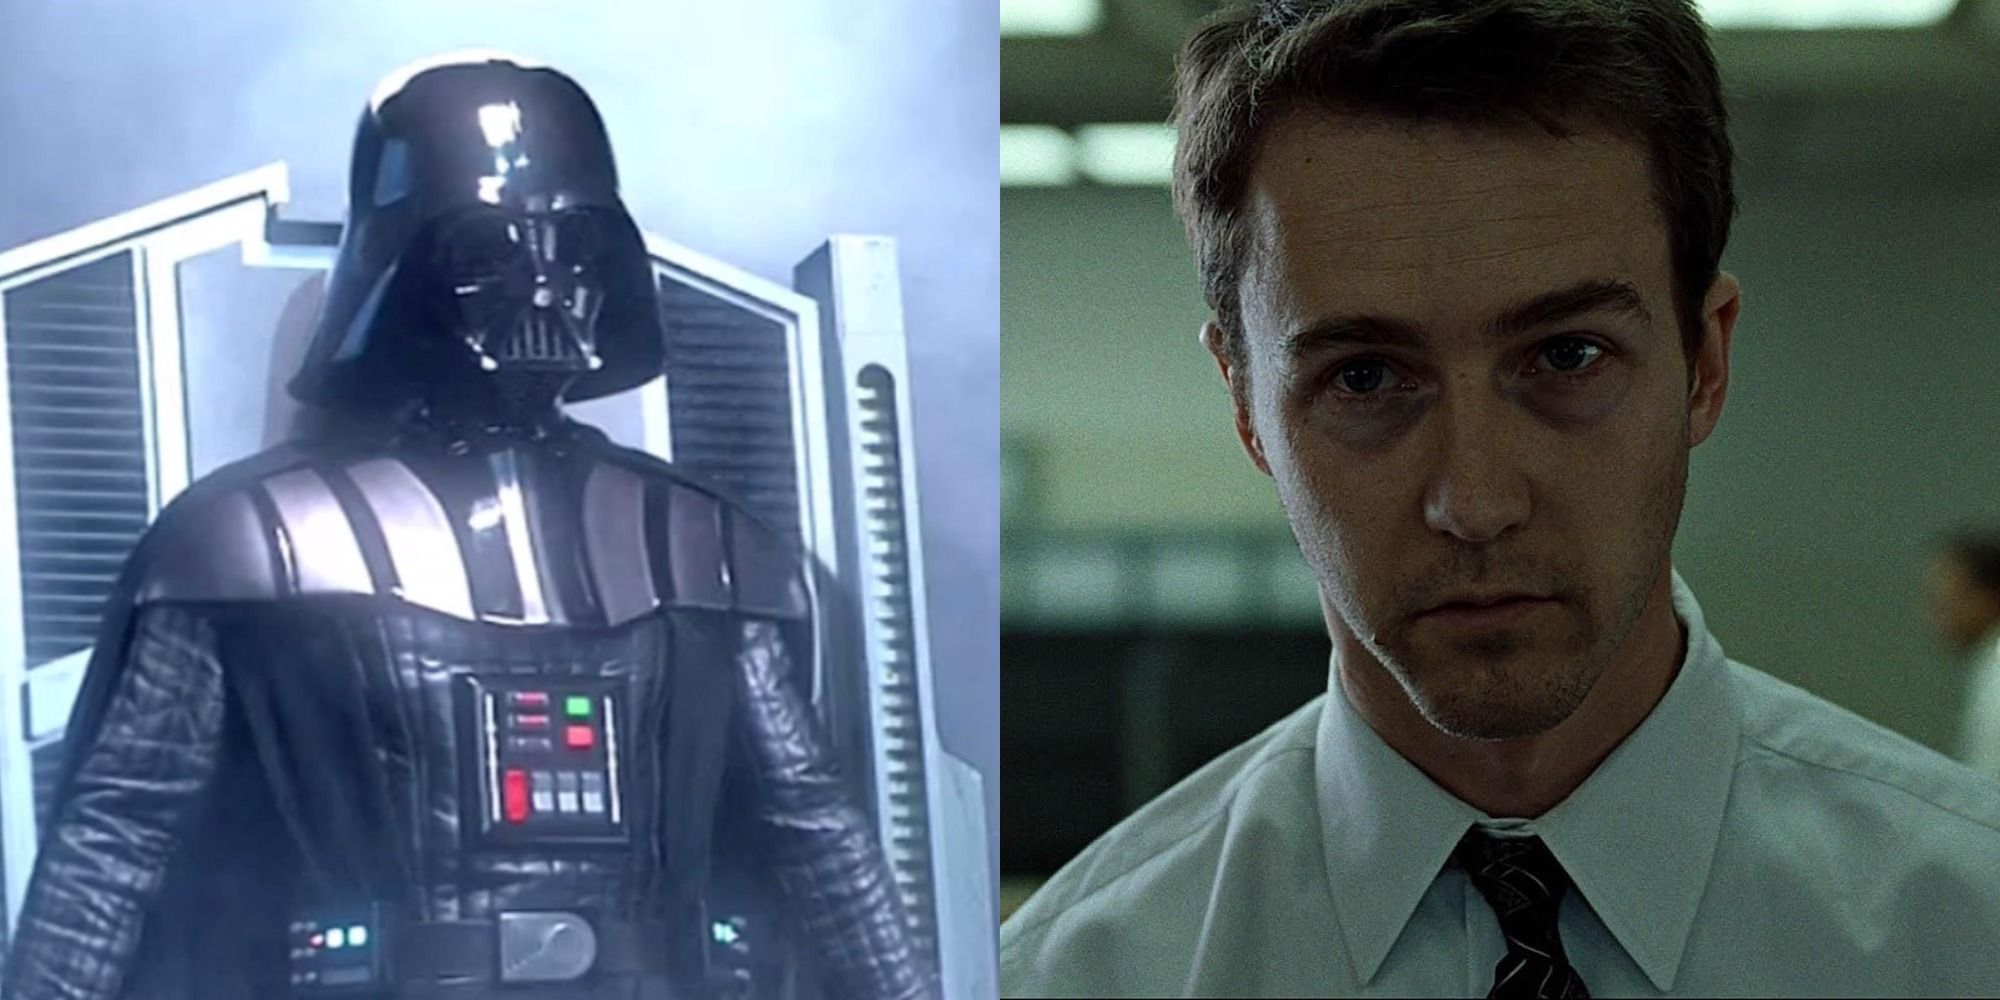 Split image of Darth Vader and The Narrator from Fight Club